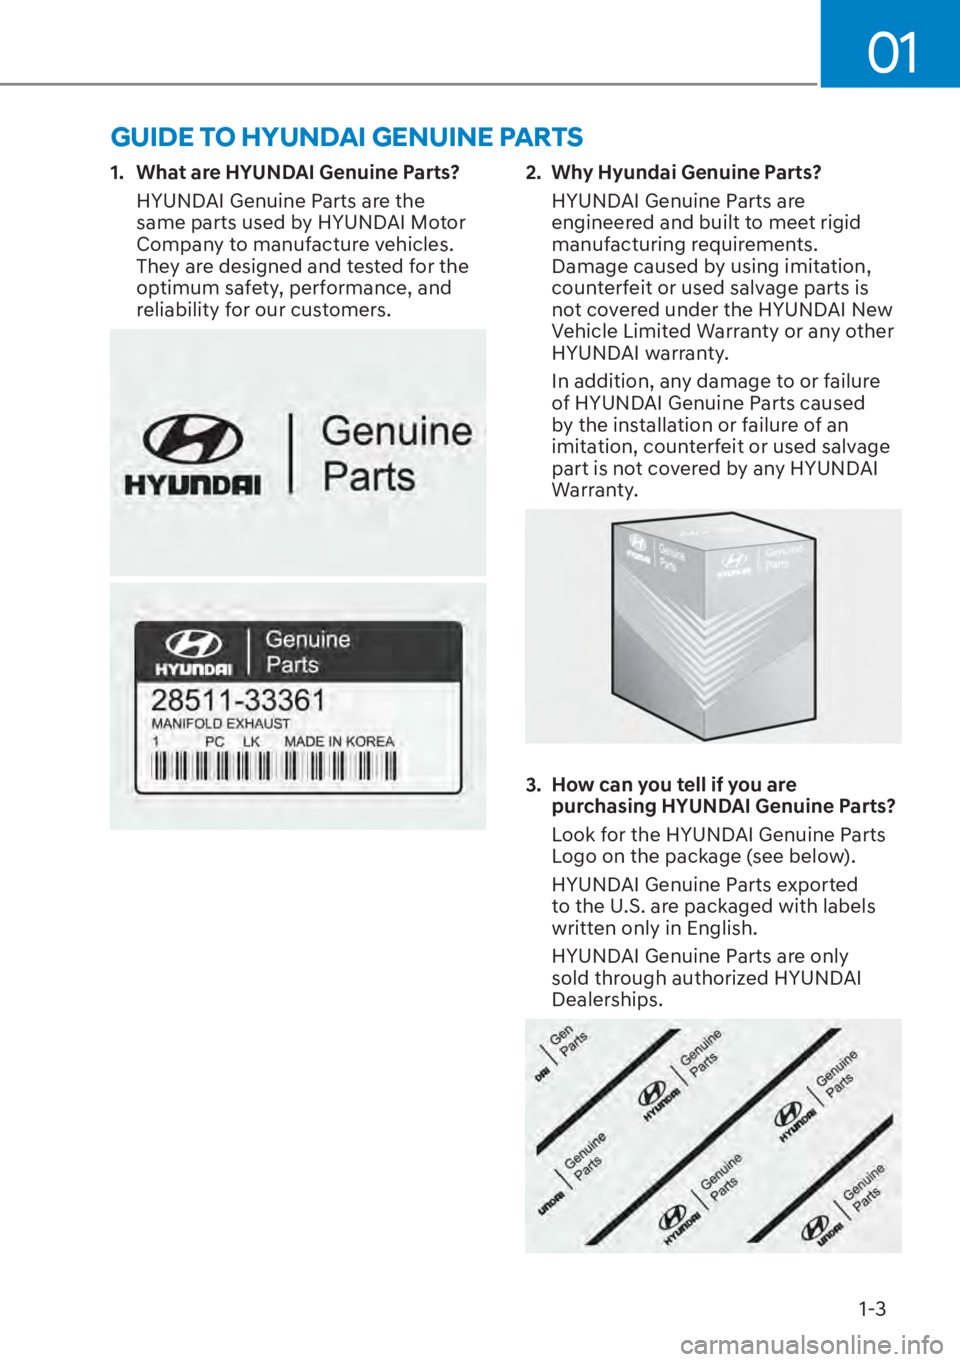 HYUNDAI ELANTRA 2023  Owners Manual 01
1-3
1.  What are HYUNDAI Genuine Parts?HYUNDAI Genuine Parts are the 
same parts used by HYUNDAI Motor 
Company to manufacture vehicles. 
They are designed and tested for the 
optimum safety, perfo